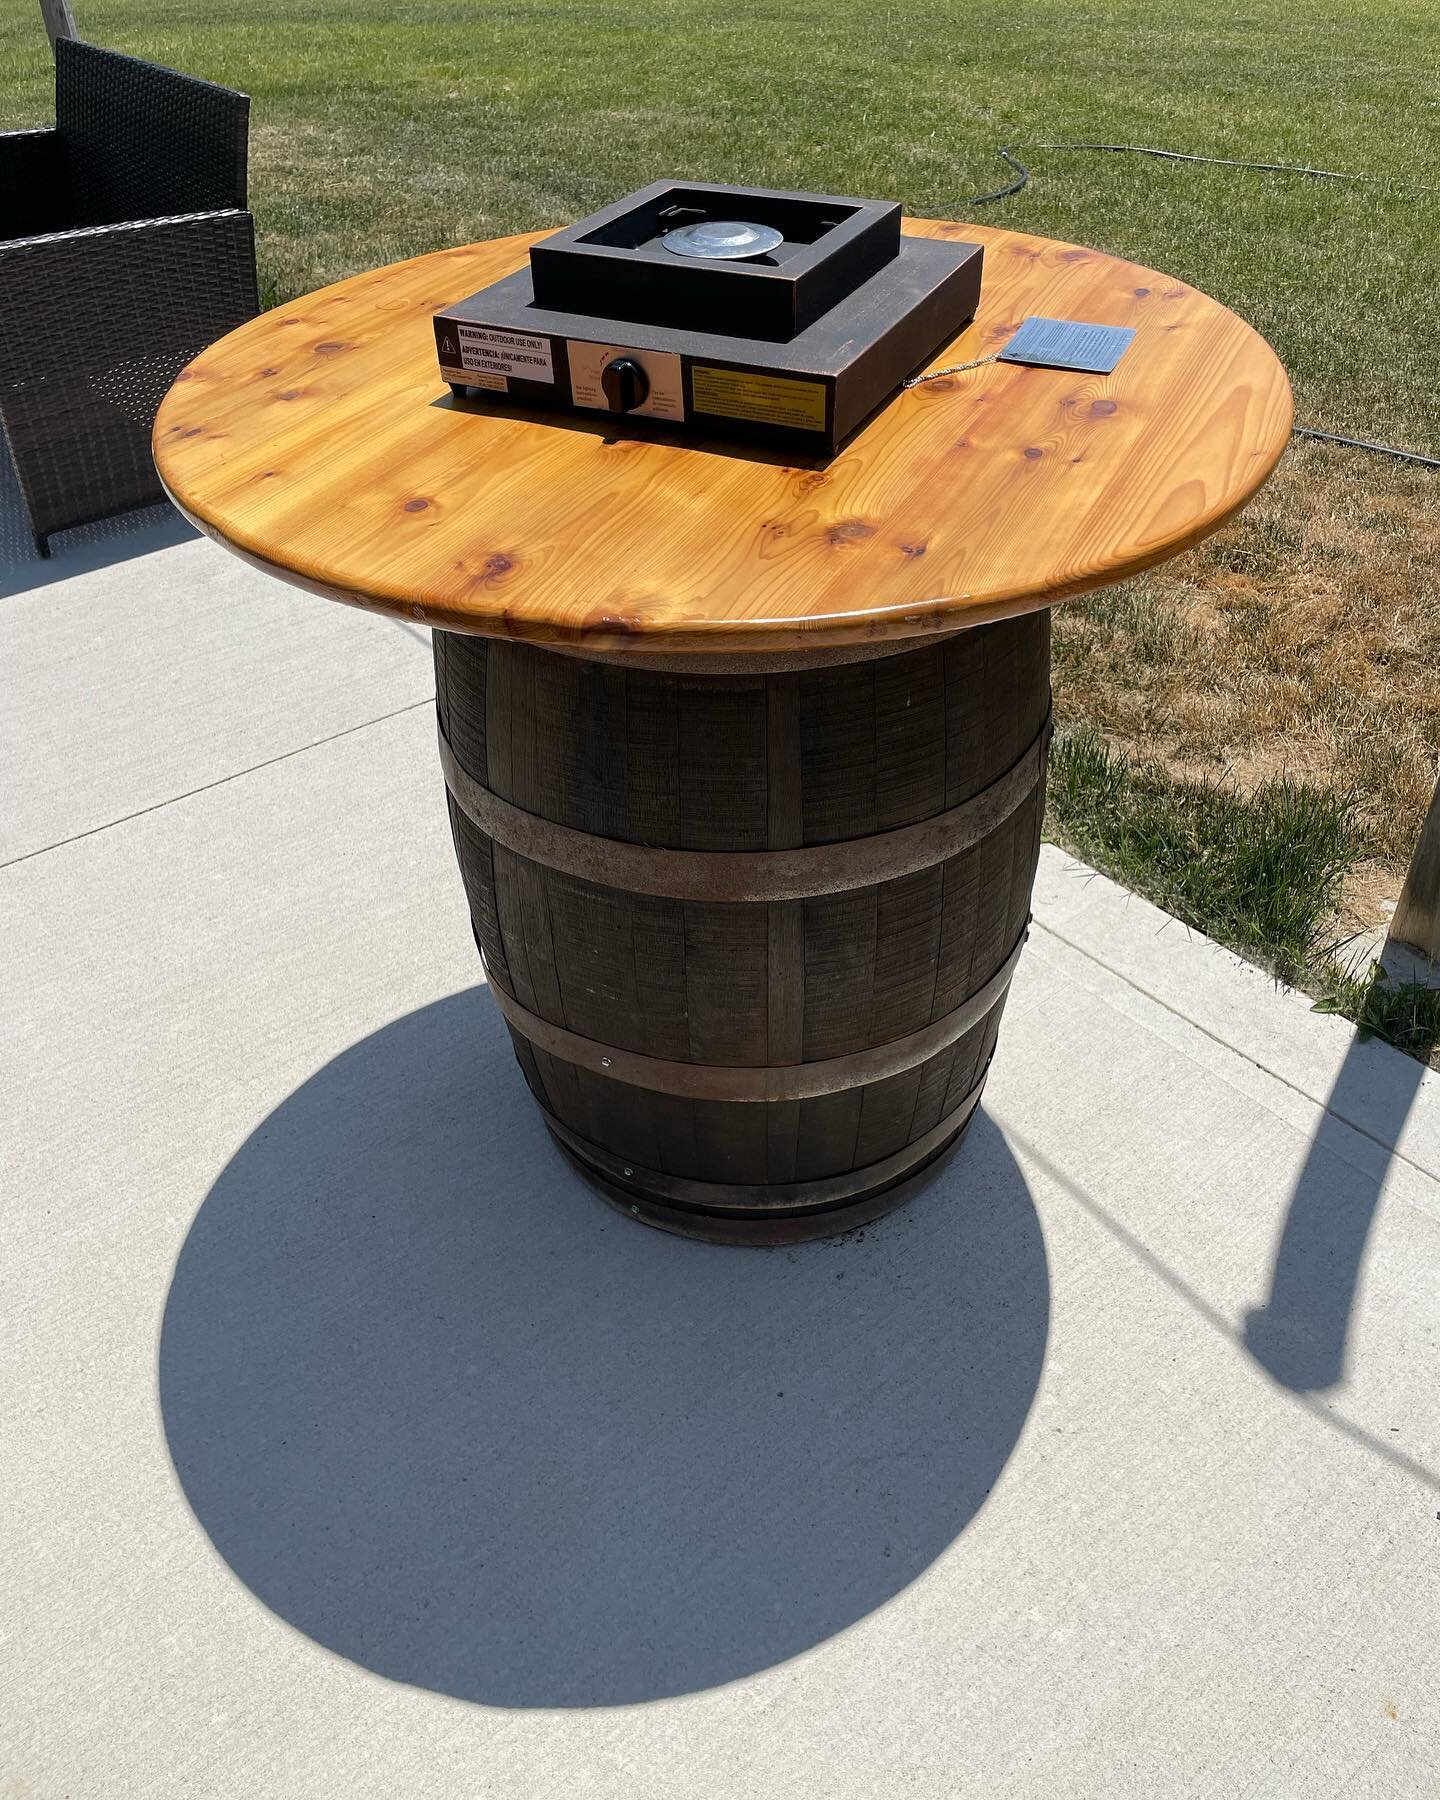 Two years ago my wife was inspired by a barrel table at a Habitat for Humanity auction. She found a wine barrel at an antique shop and asked me to make something for the back patio. This was two years ago. I built the table top out of cedar and got d